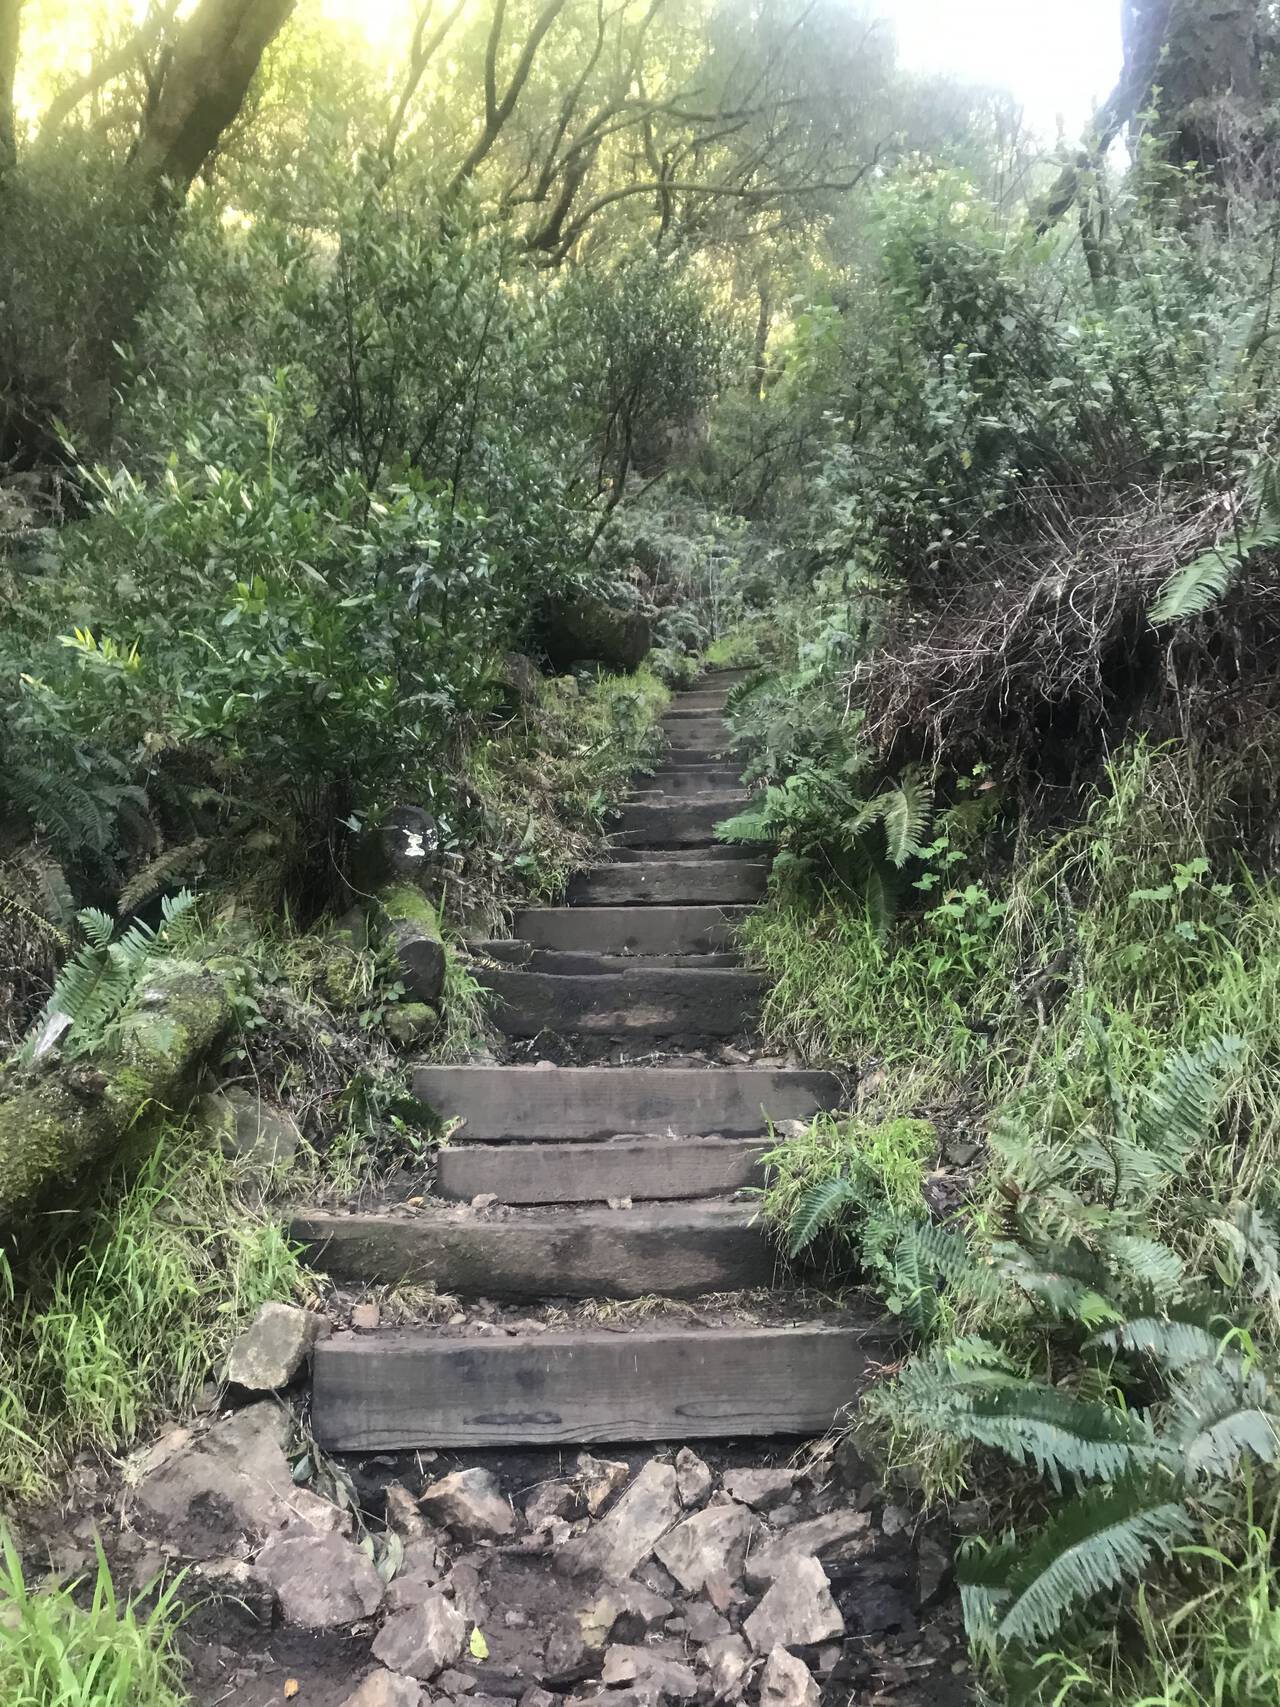 Plant growth encroaches on a line of wooden stairs held in place with rocks